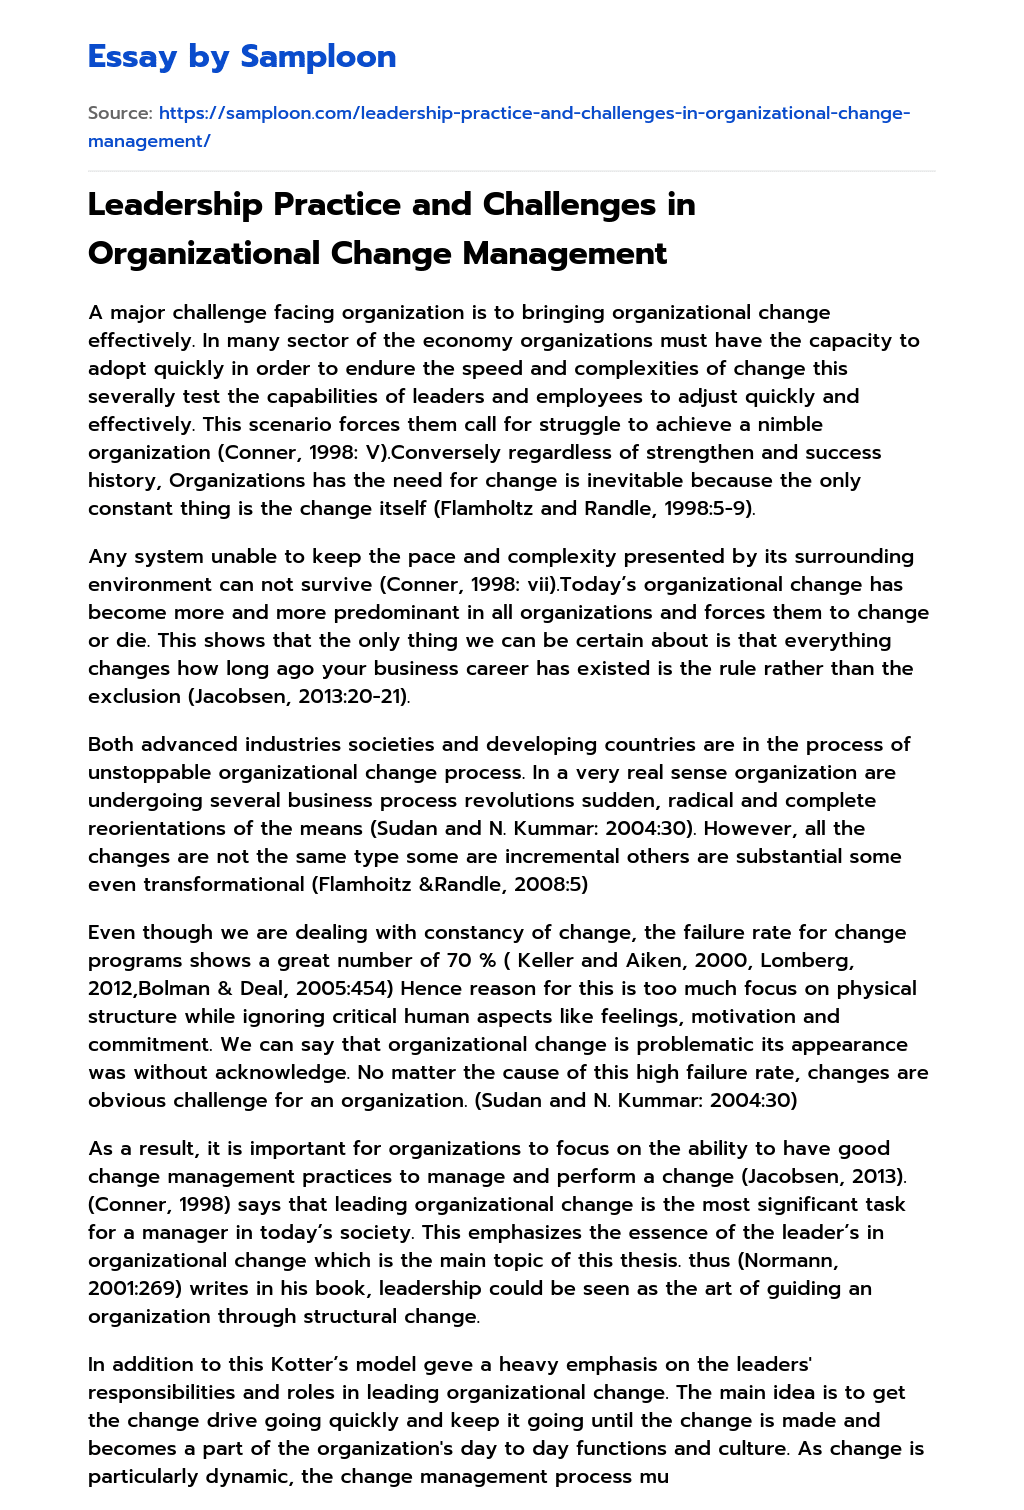 Leadership Practice and Challenges in Organizational Change Management essay